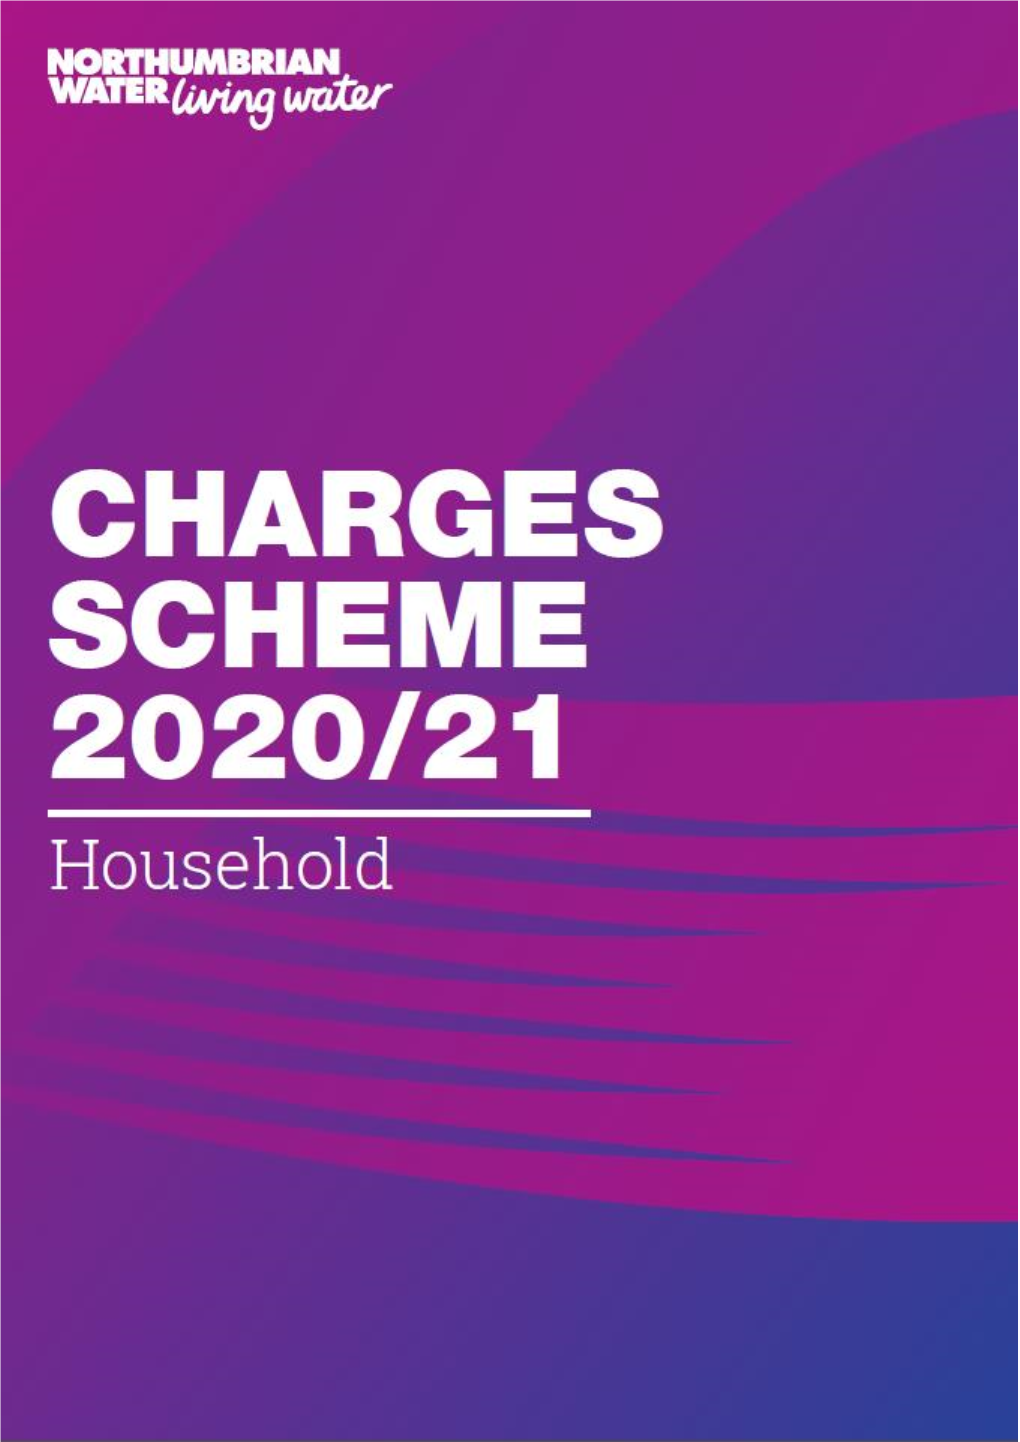 Our 2020/21 Household Charges